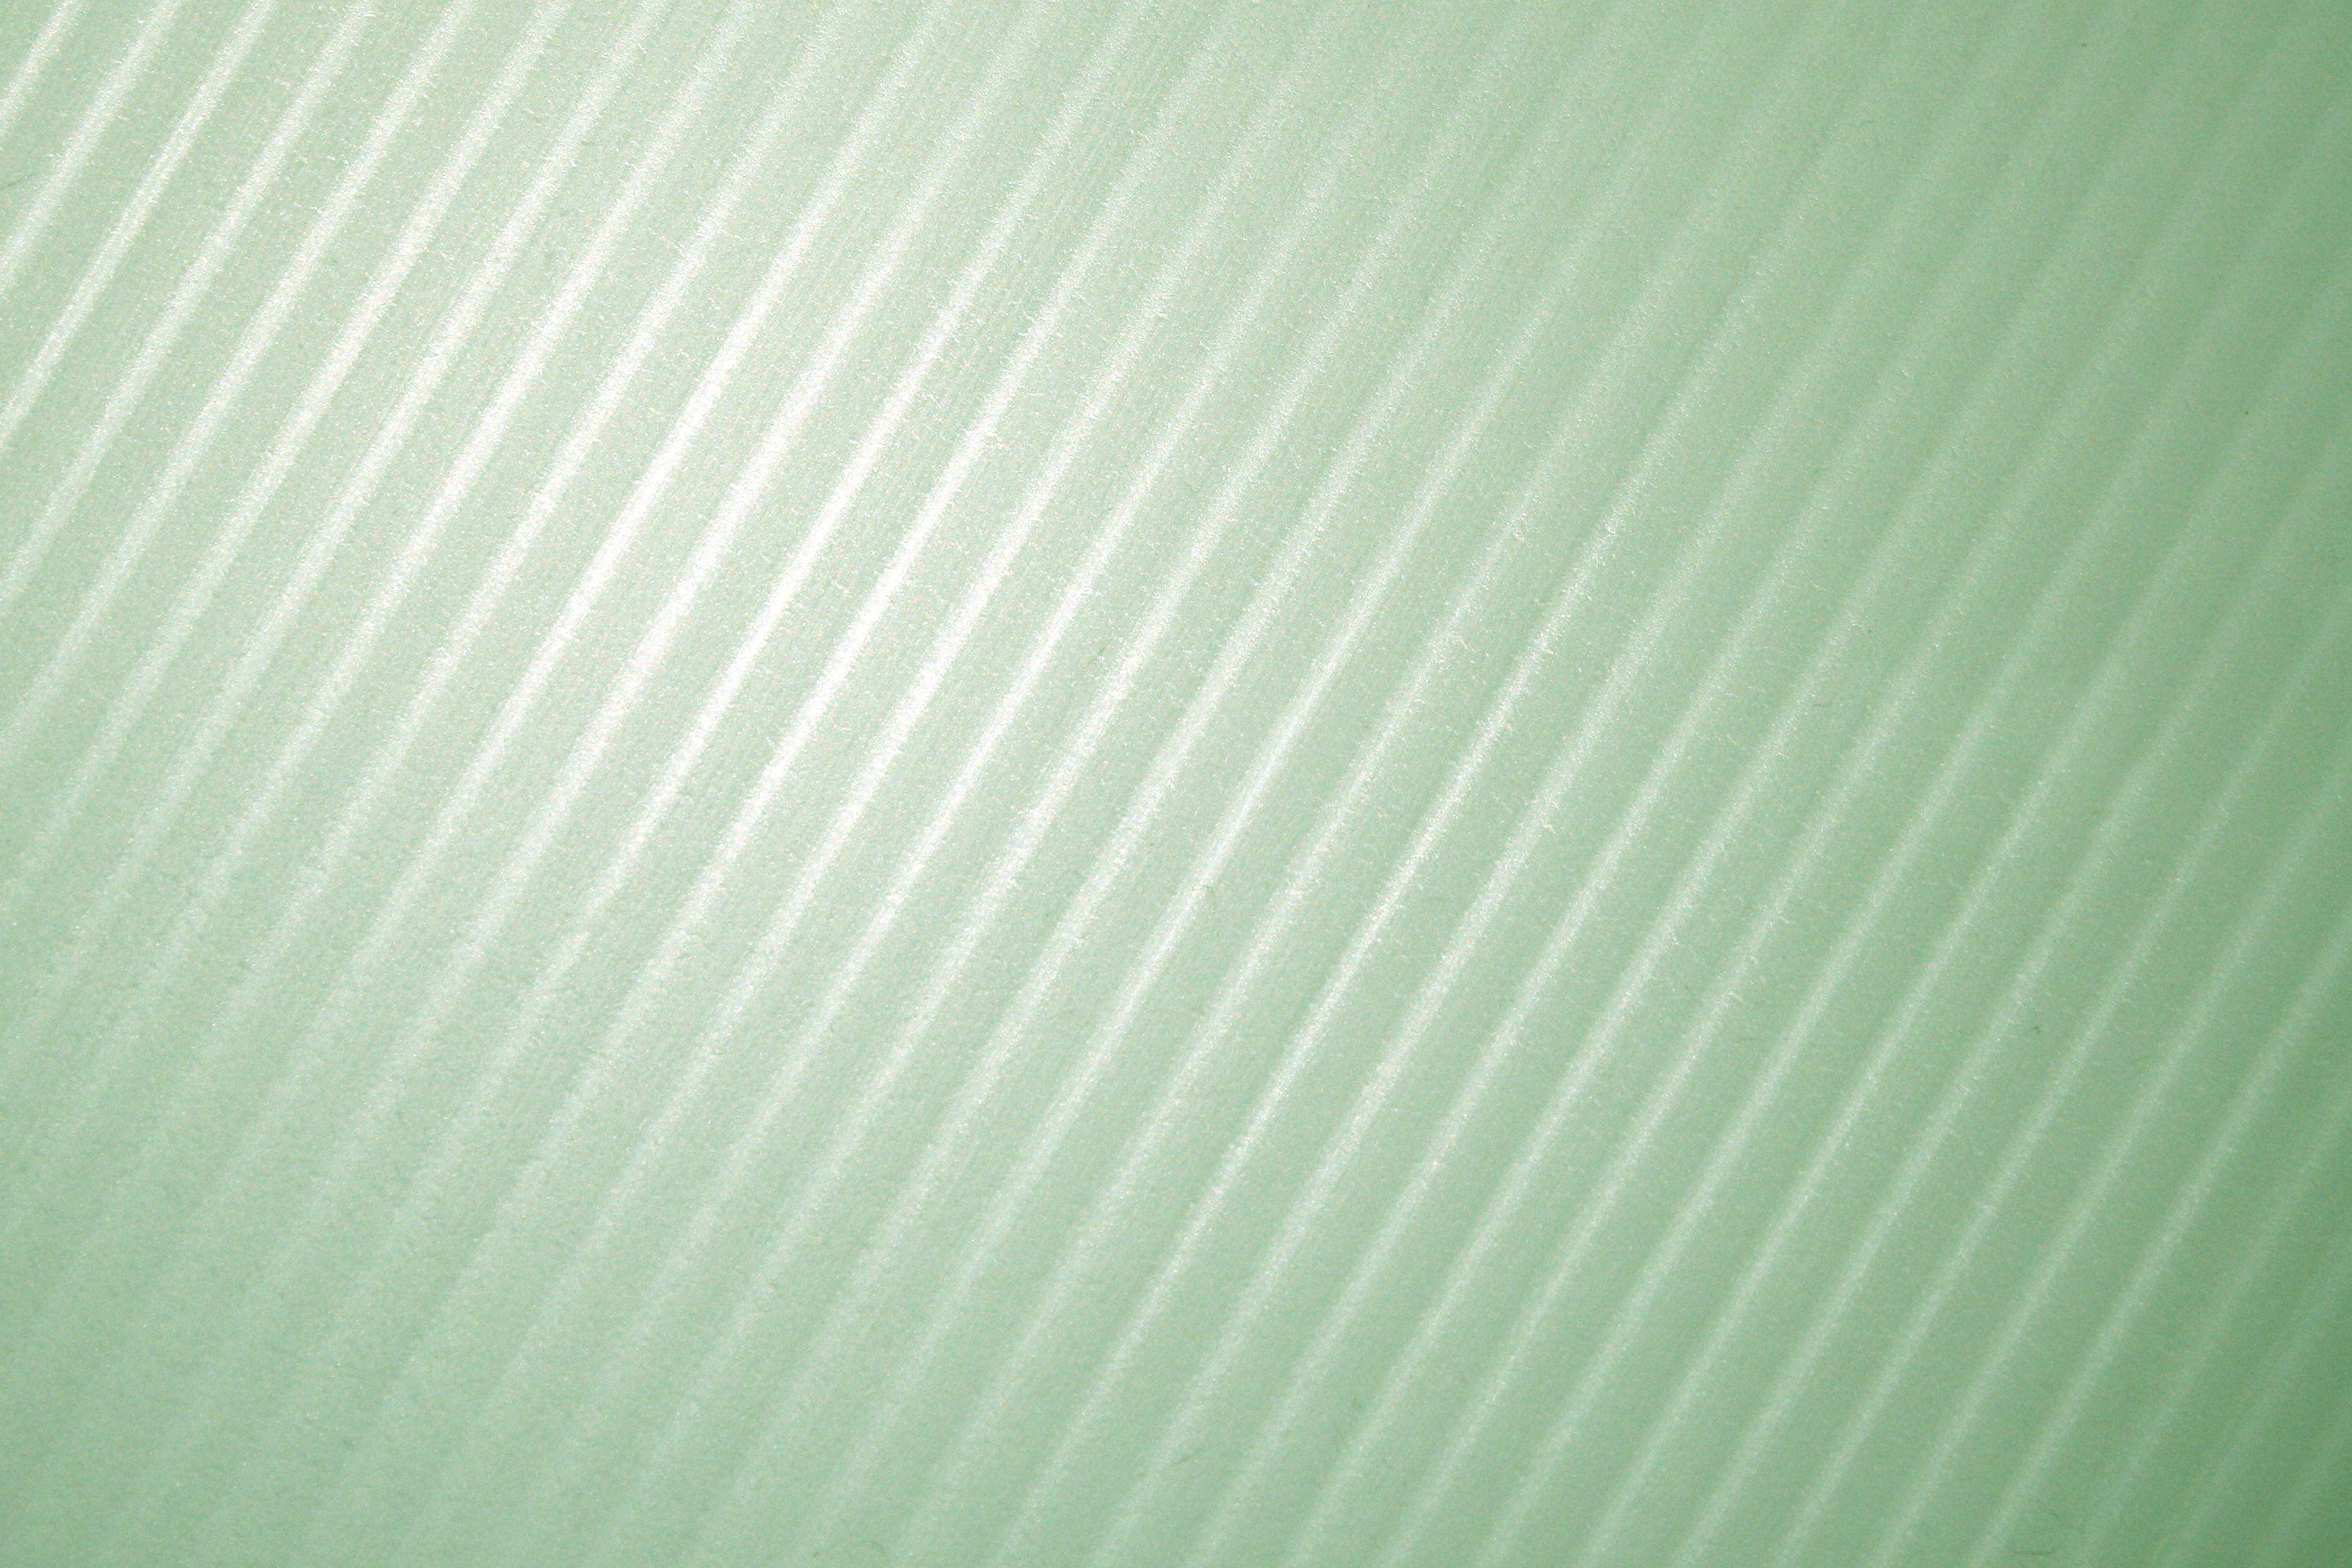 Sage Green Diagonal Striped Plastic Texture Picture. Free